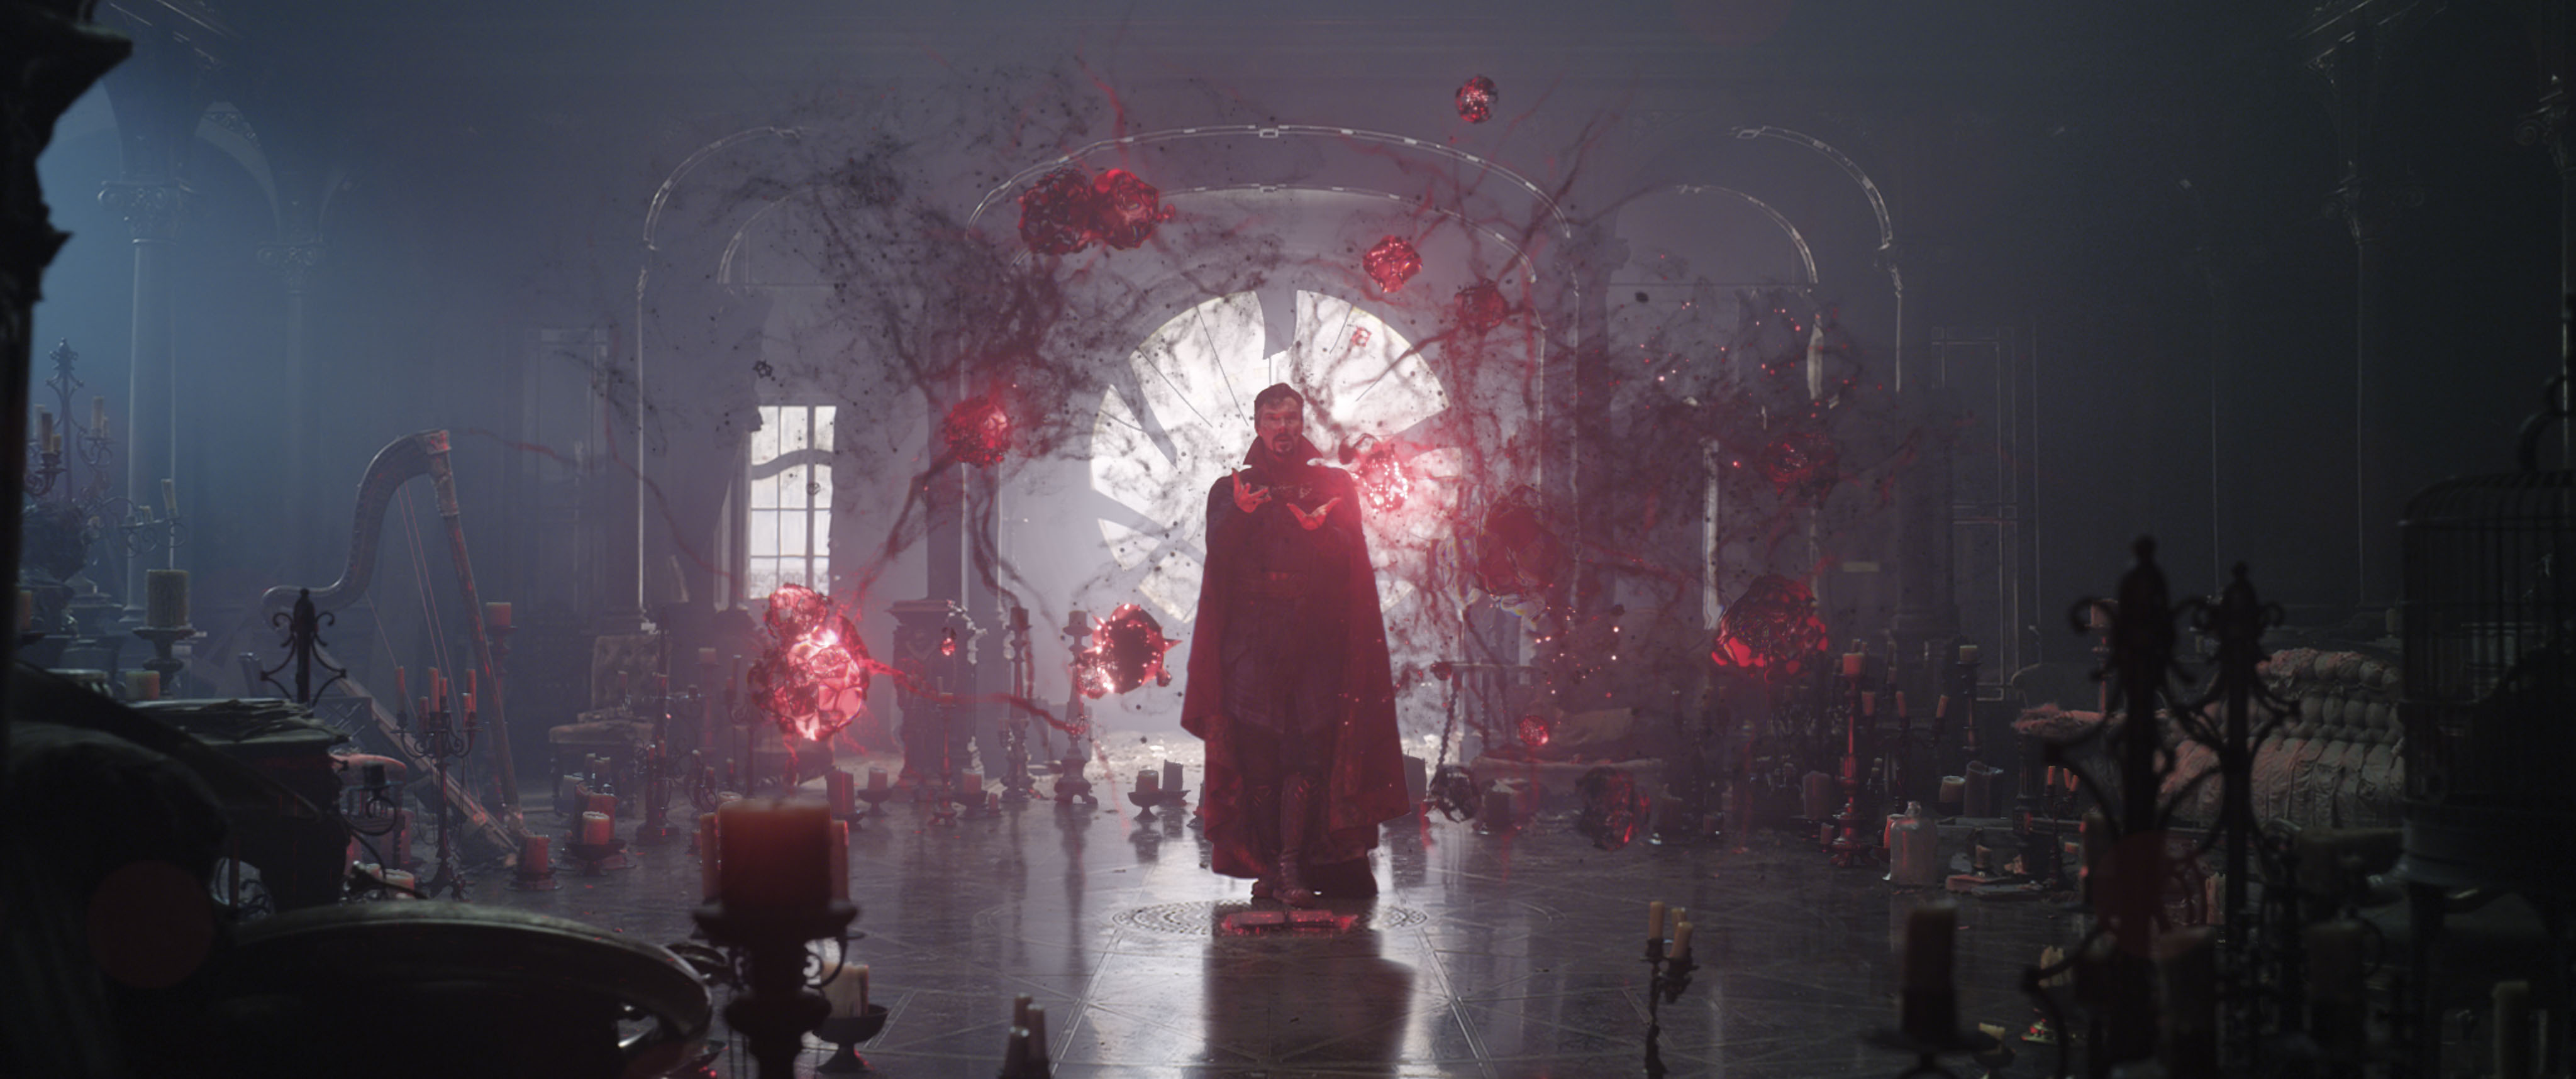 In Dr Strange in the Multiverse of Madness, the multiverse is breached by various magical spells and special abilities.